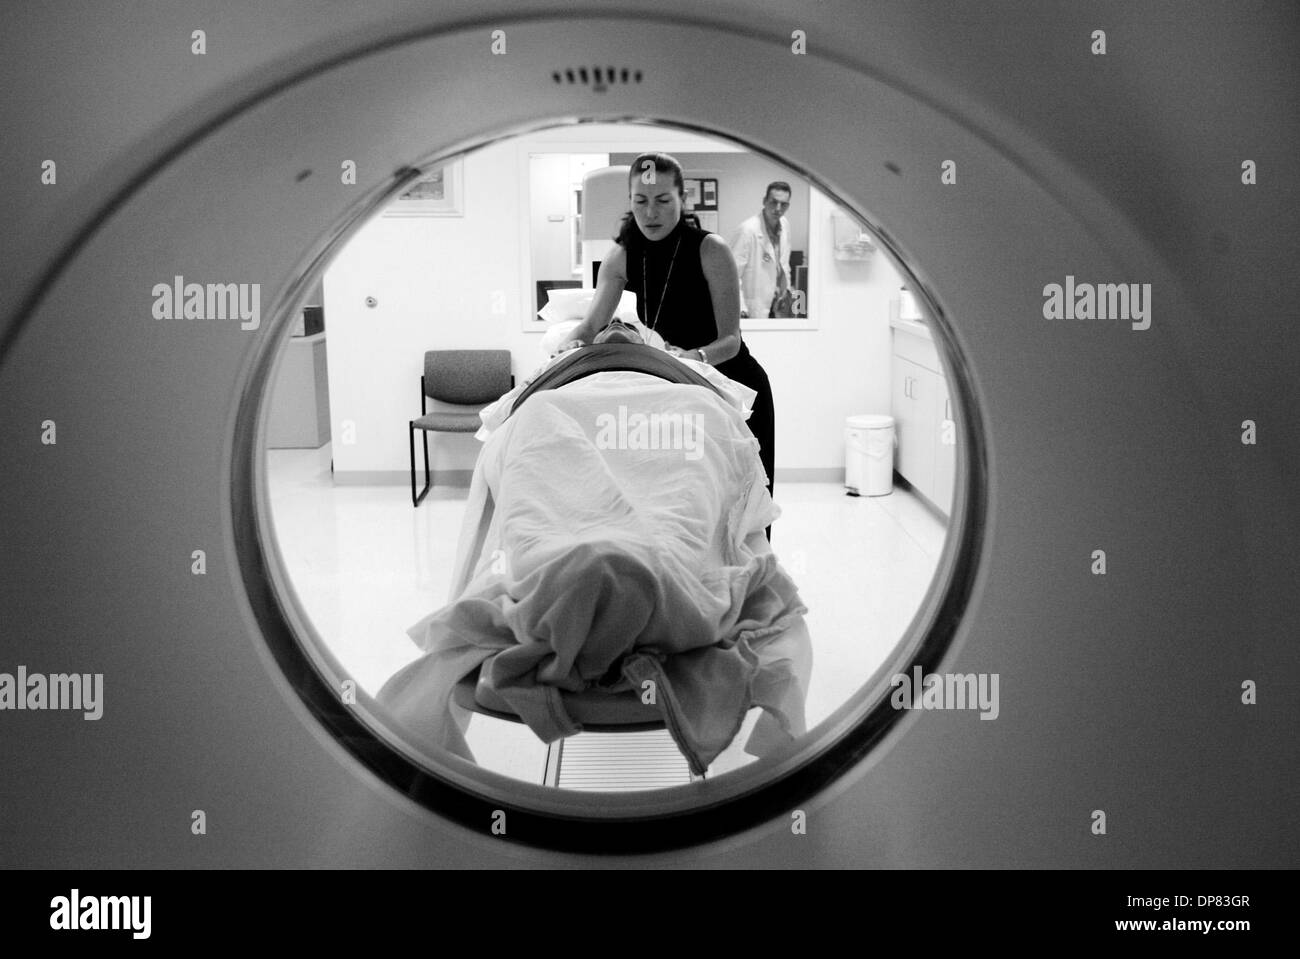 Nov 03, 2006 - San Francisco, CA, USA - Senior Nuclear Medicine Technologist Michelle Huesman prepares John Shevenell for a Positron Emission Tomography (PET) scan at the University of California San Francisco Radiology Department on Oct.11, 2006, in San Francisco, Calif. (Credit Image: © Jane Tyska/The Daily Review/ZUMA Press) RESTRICTIONS: USA Tabloid RIGHTS OUT! Stock Photo